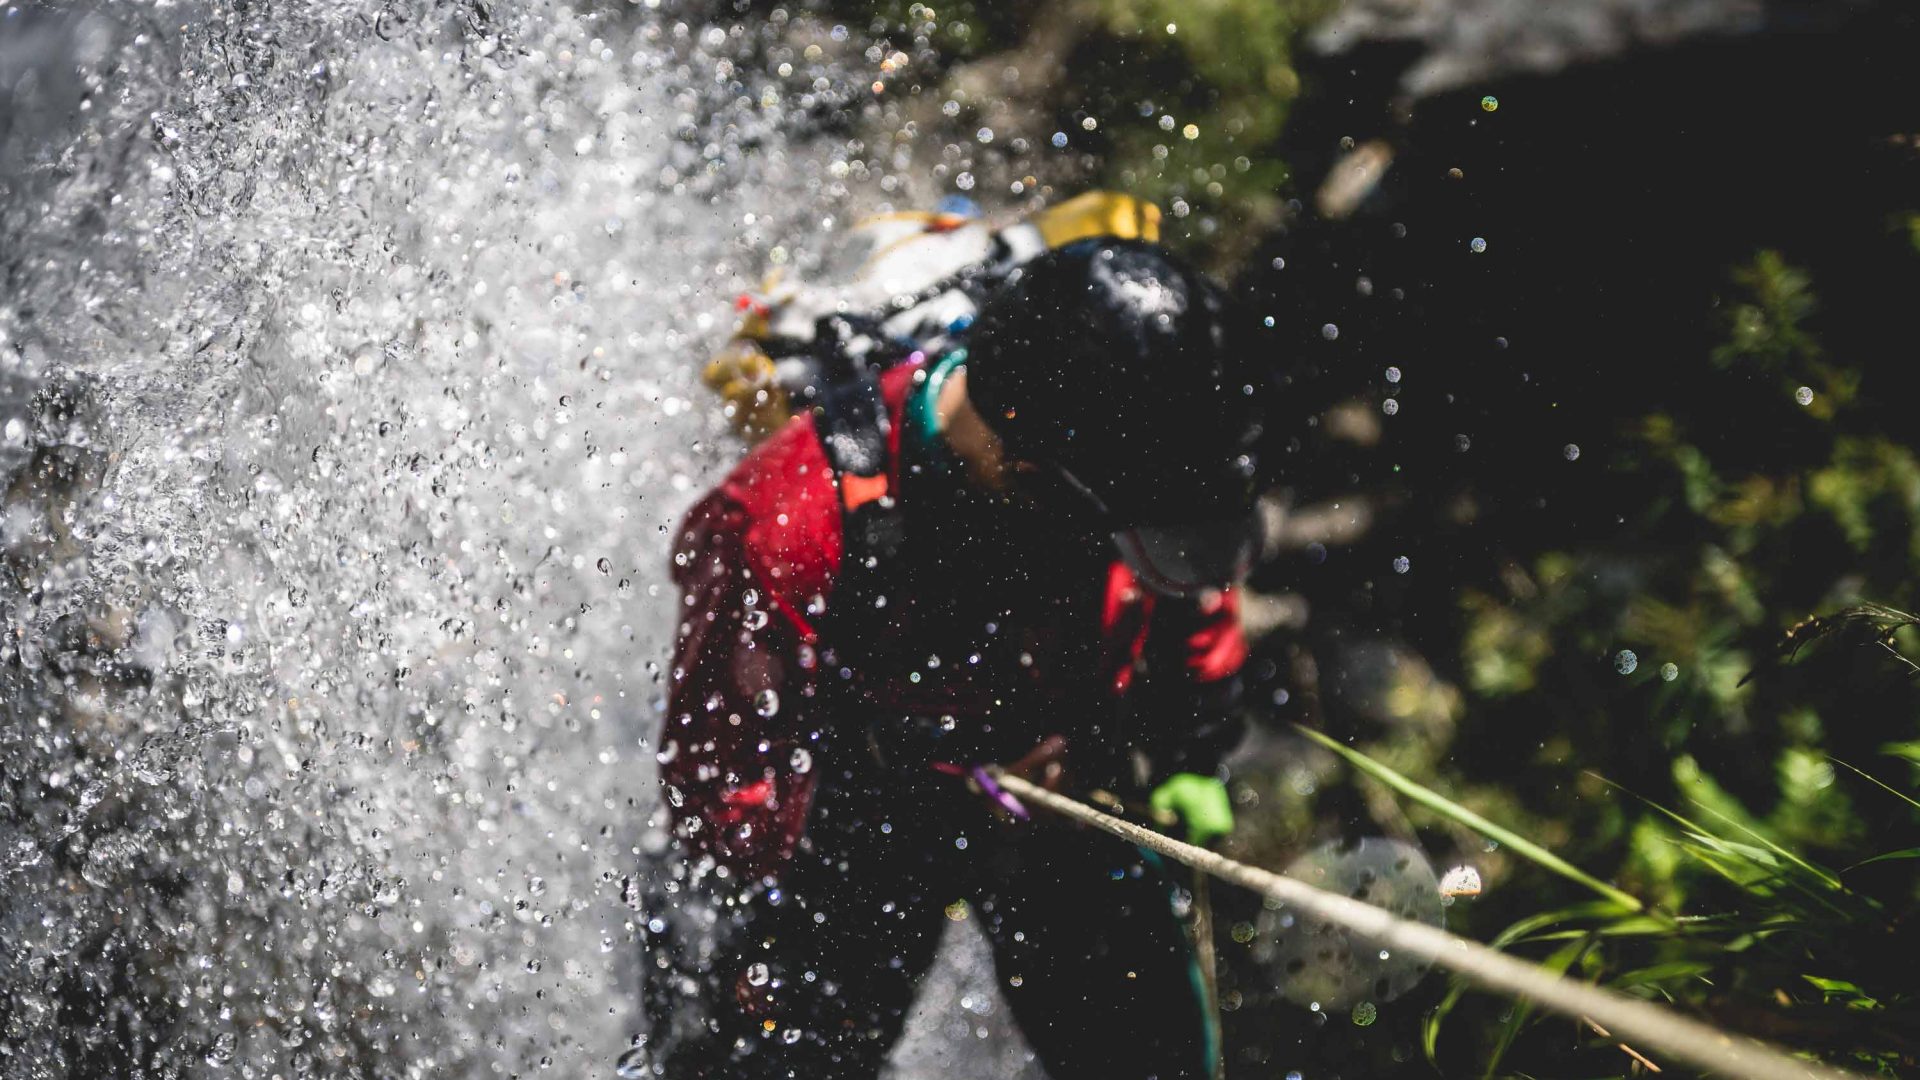 Water sprays up as a person is seen canyoning down what is presumably a waterfall.